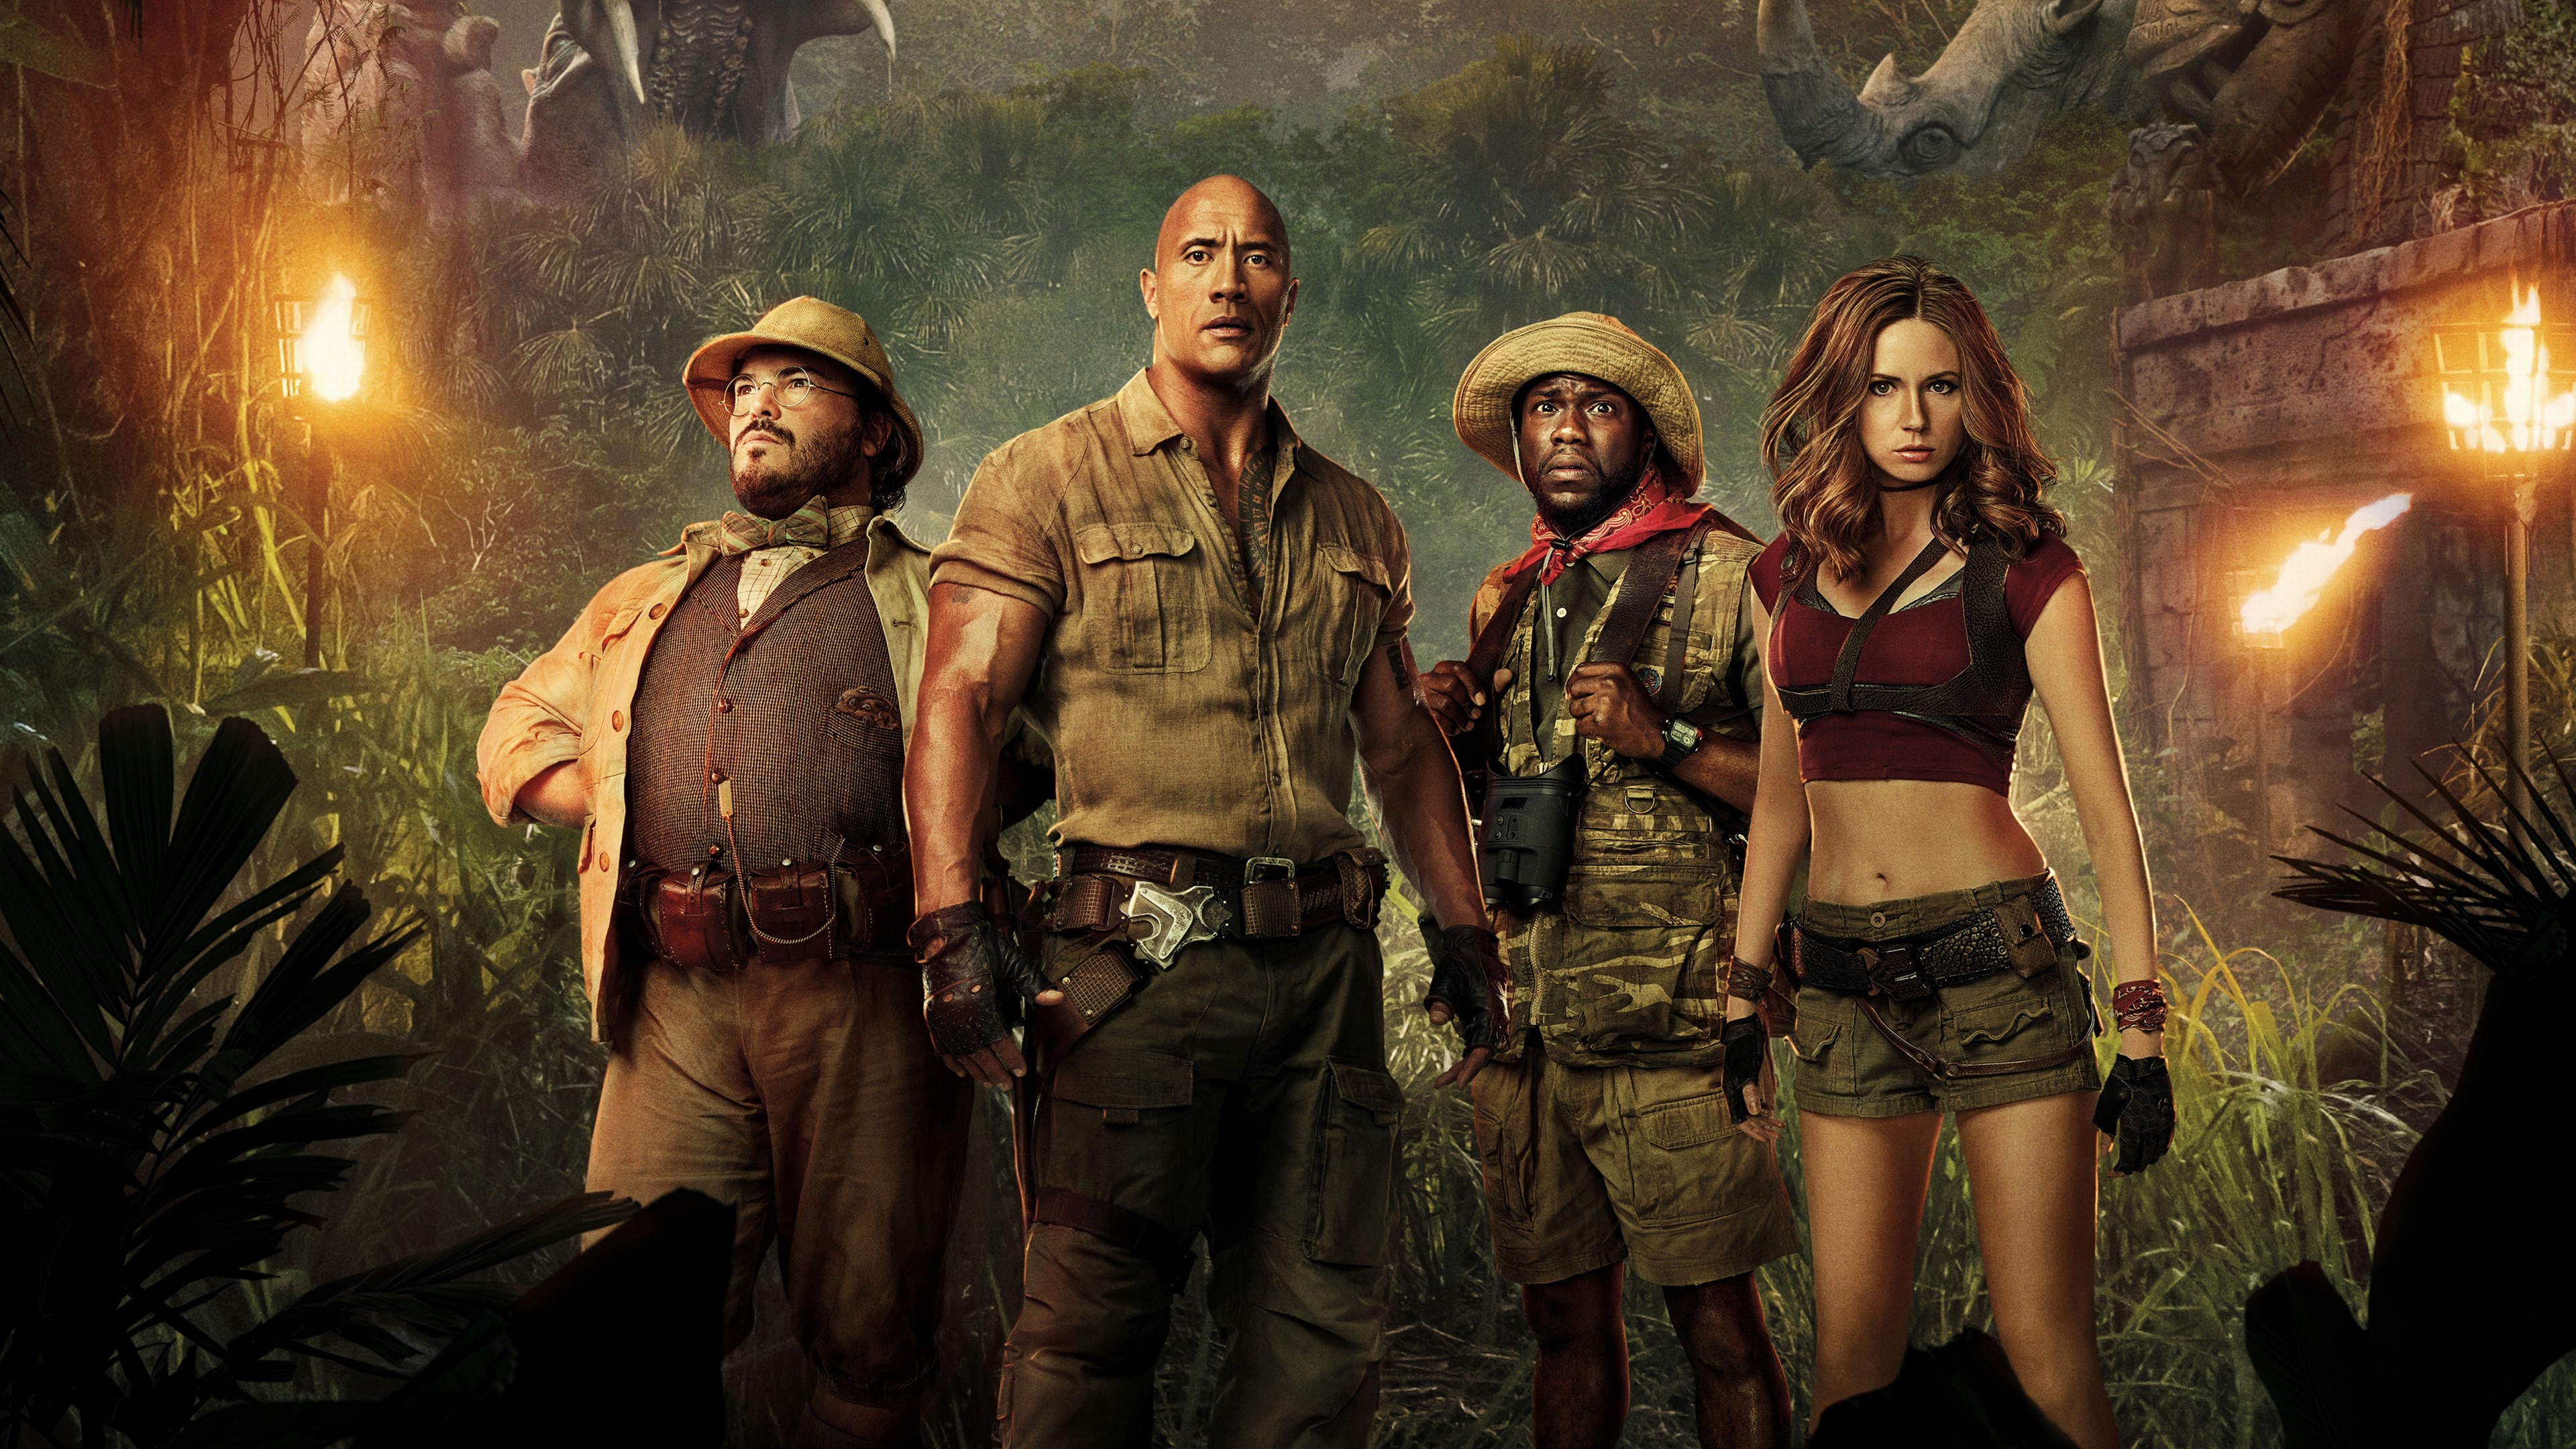 Jumanji: Welcome to the Jungle movie, Hd wallpapers and, Backgrounds, 3840x2160 4K Desktop